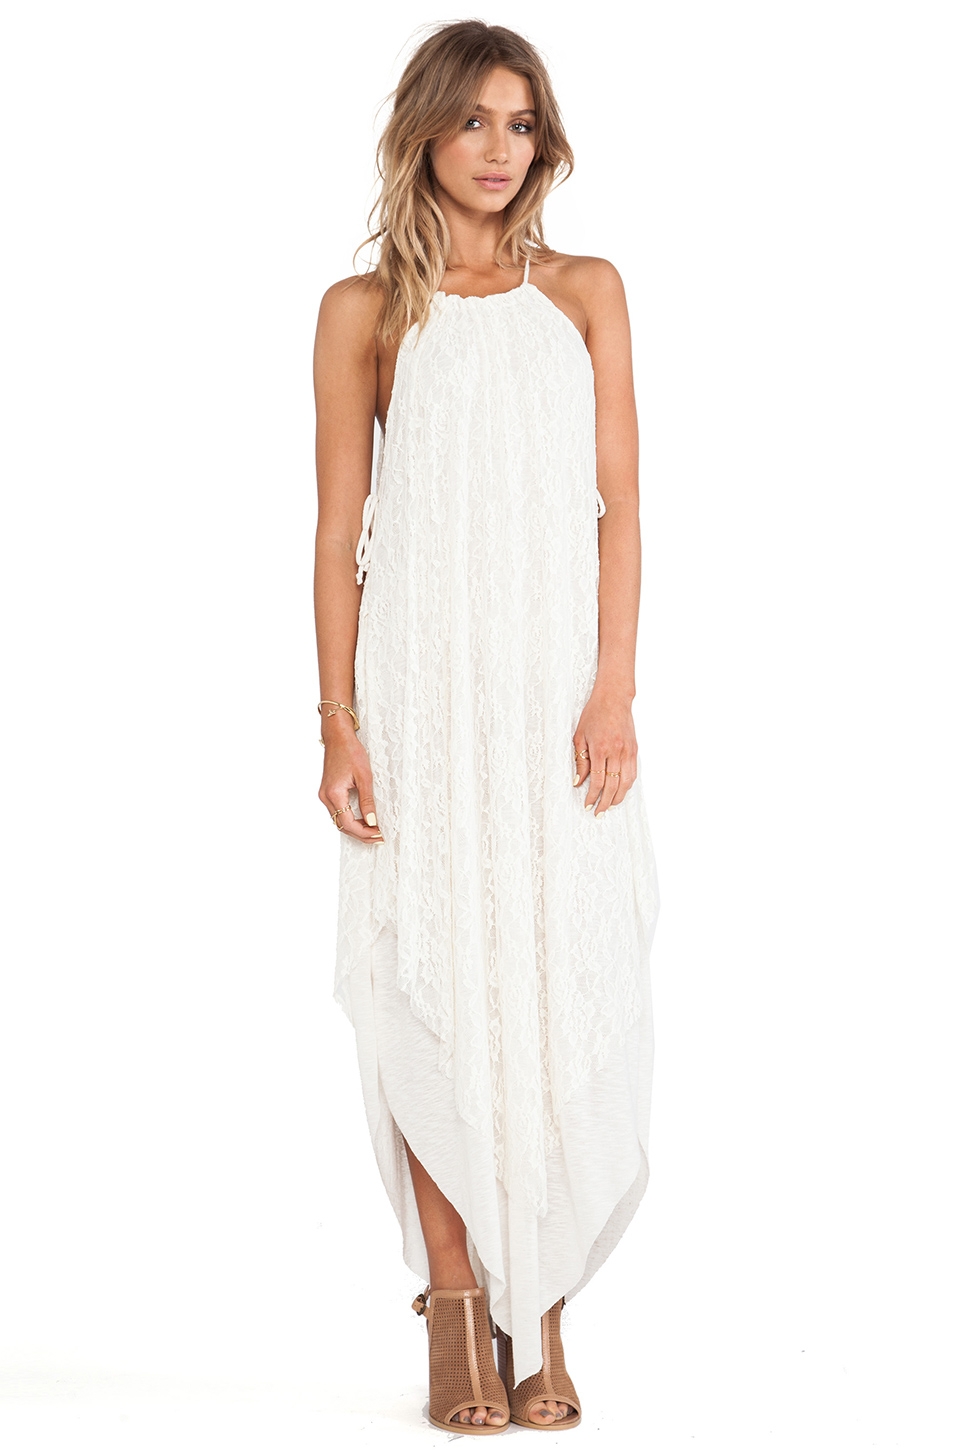 Free People Olympia Lace Dress in White (Ivory)